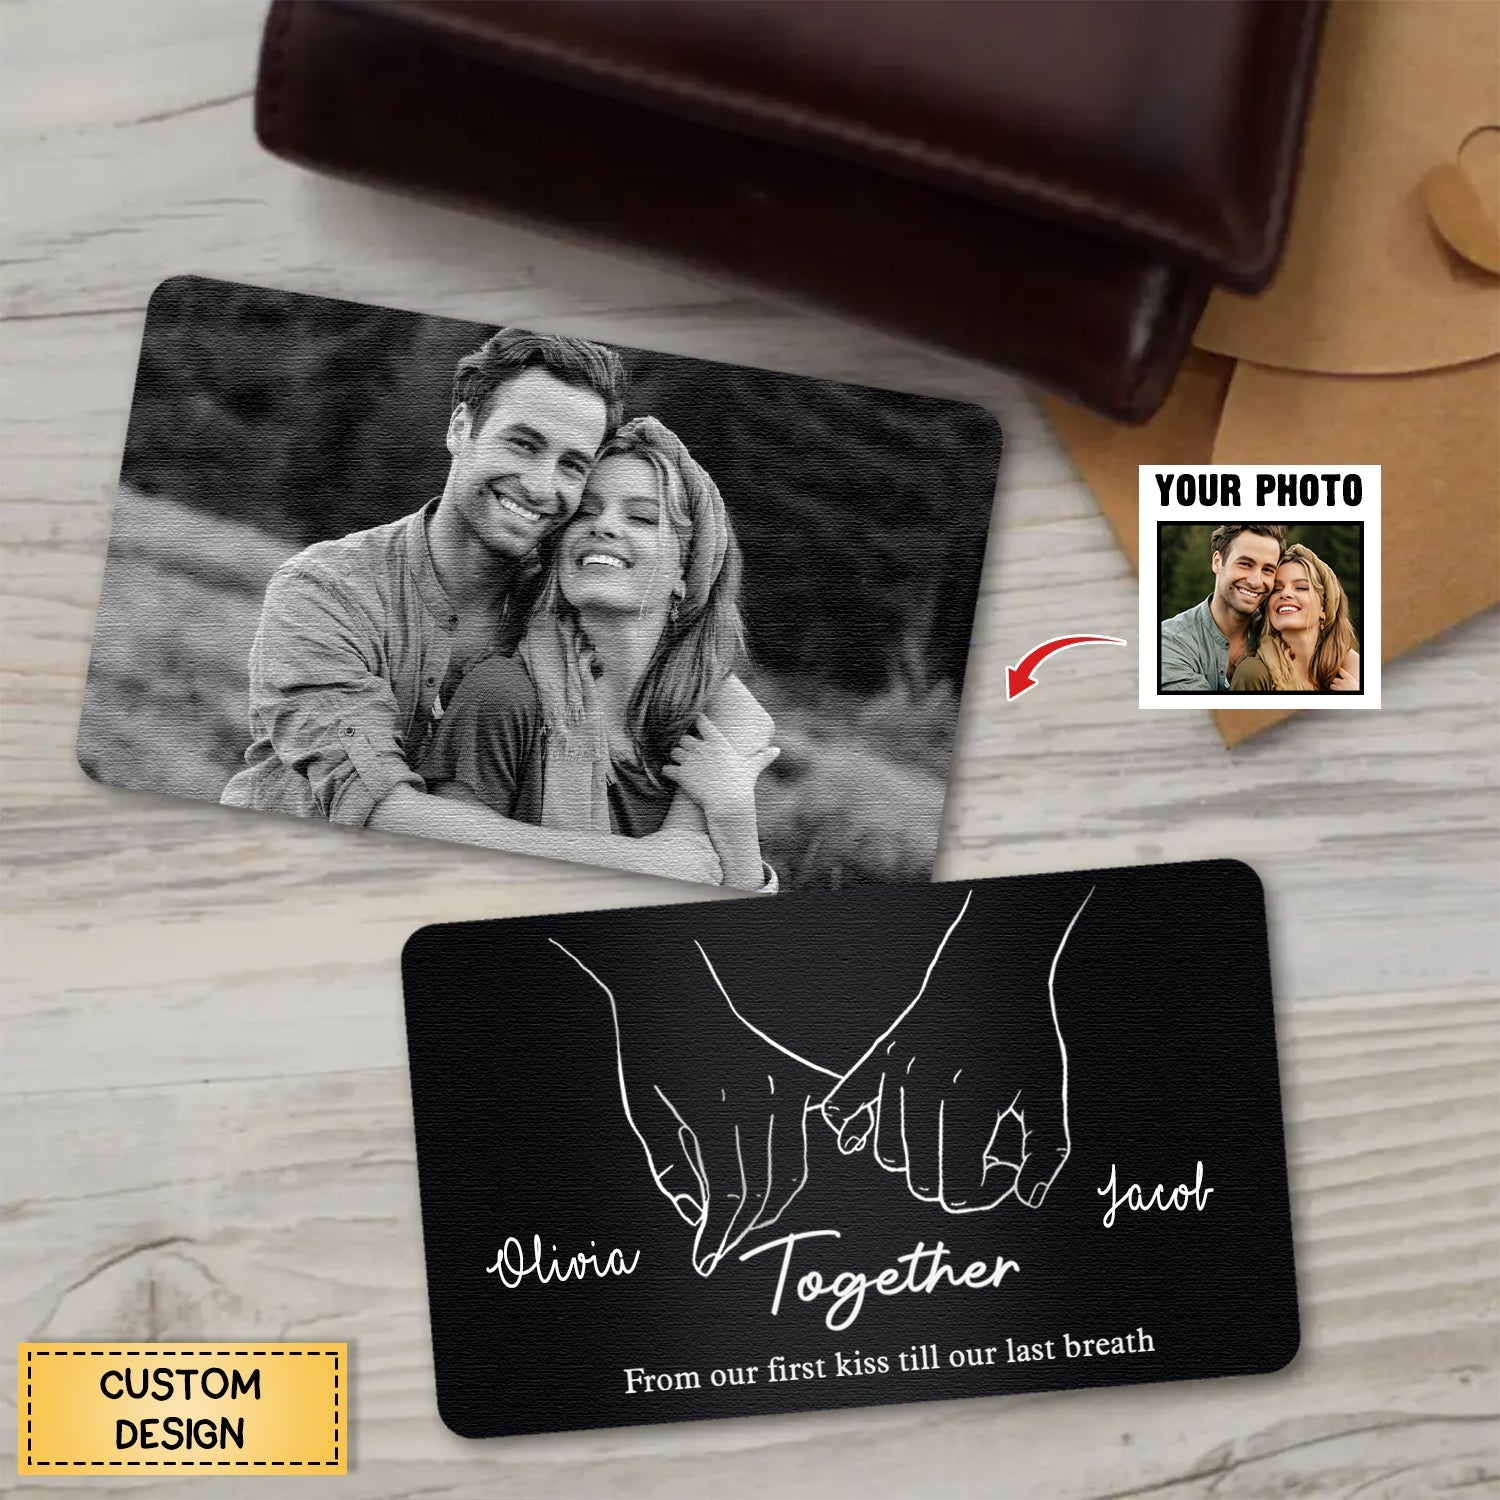 From Our First Kiss - Personalized Couple Black Wallet Insert Card